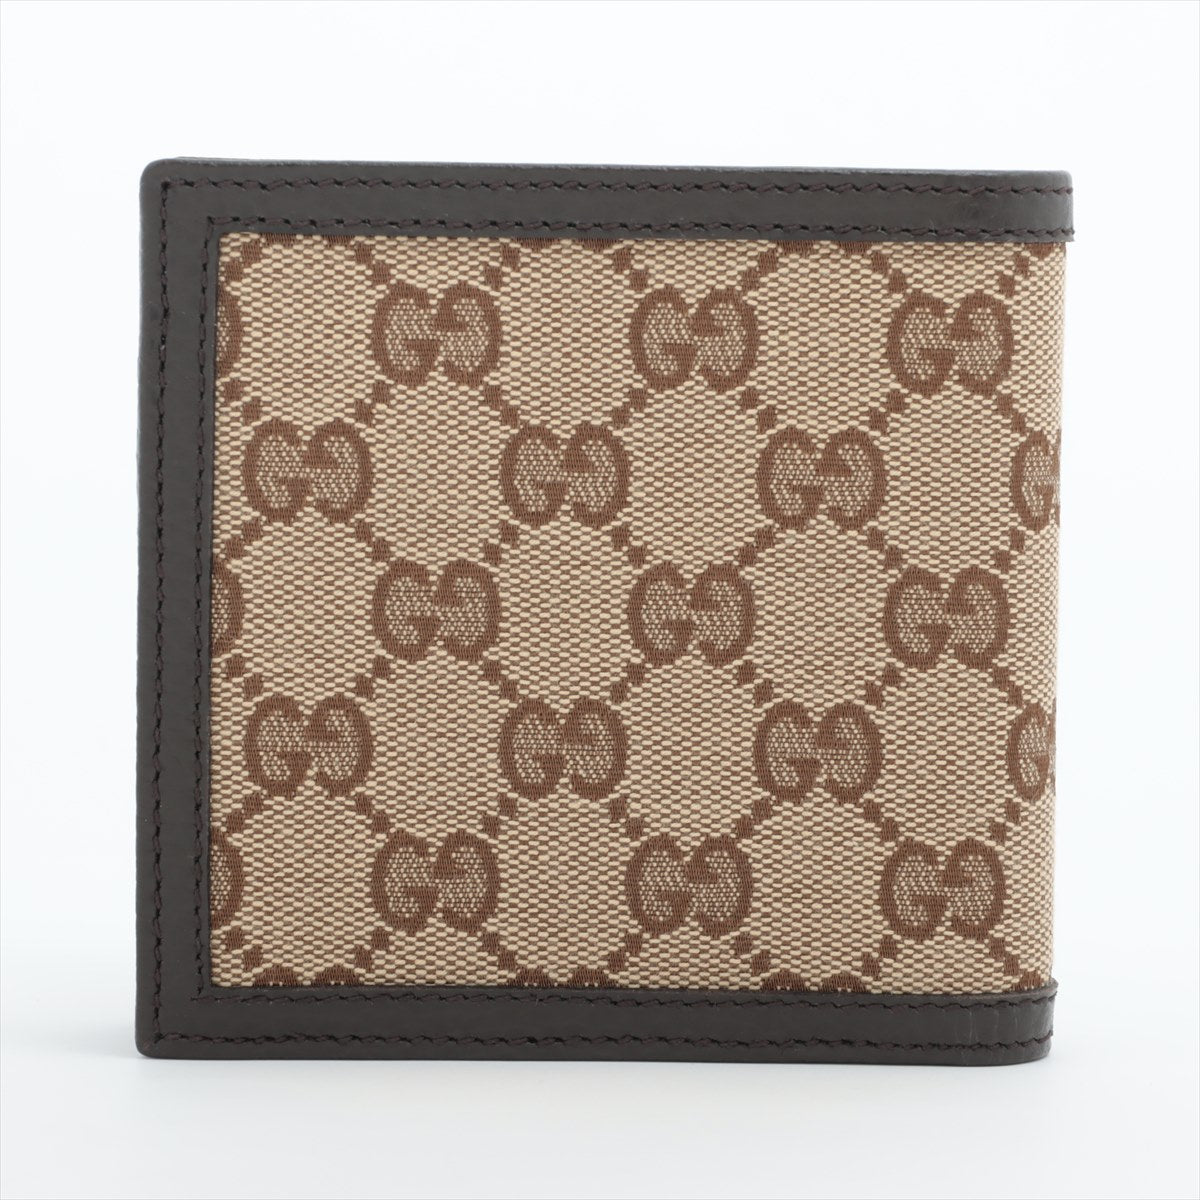 Gucci GG Canvas 150413 Canvas & leather Compact Wallet Beige Ⓖ Engraving Yes